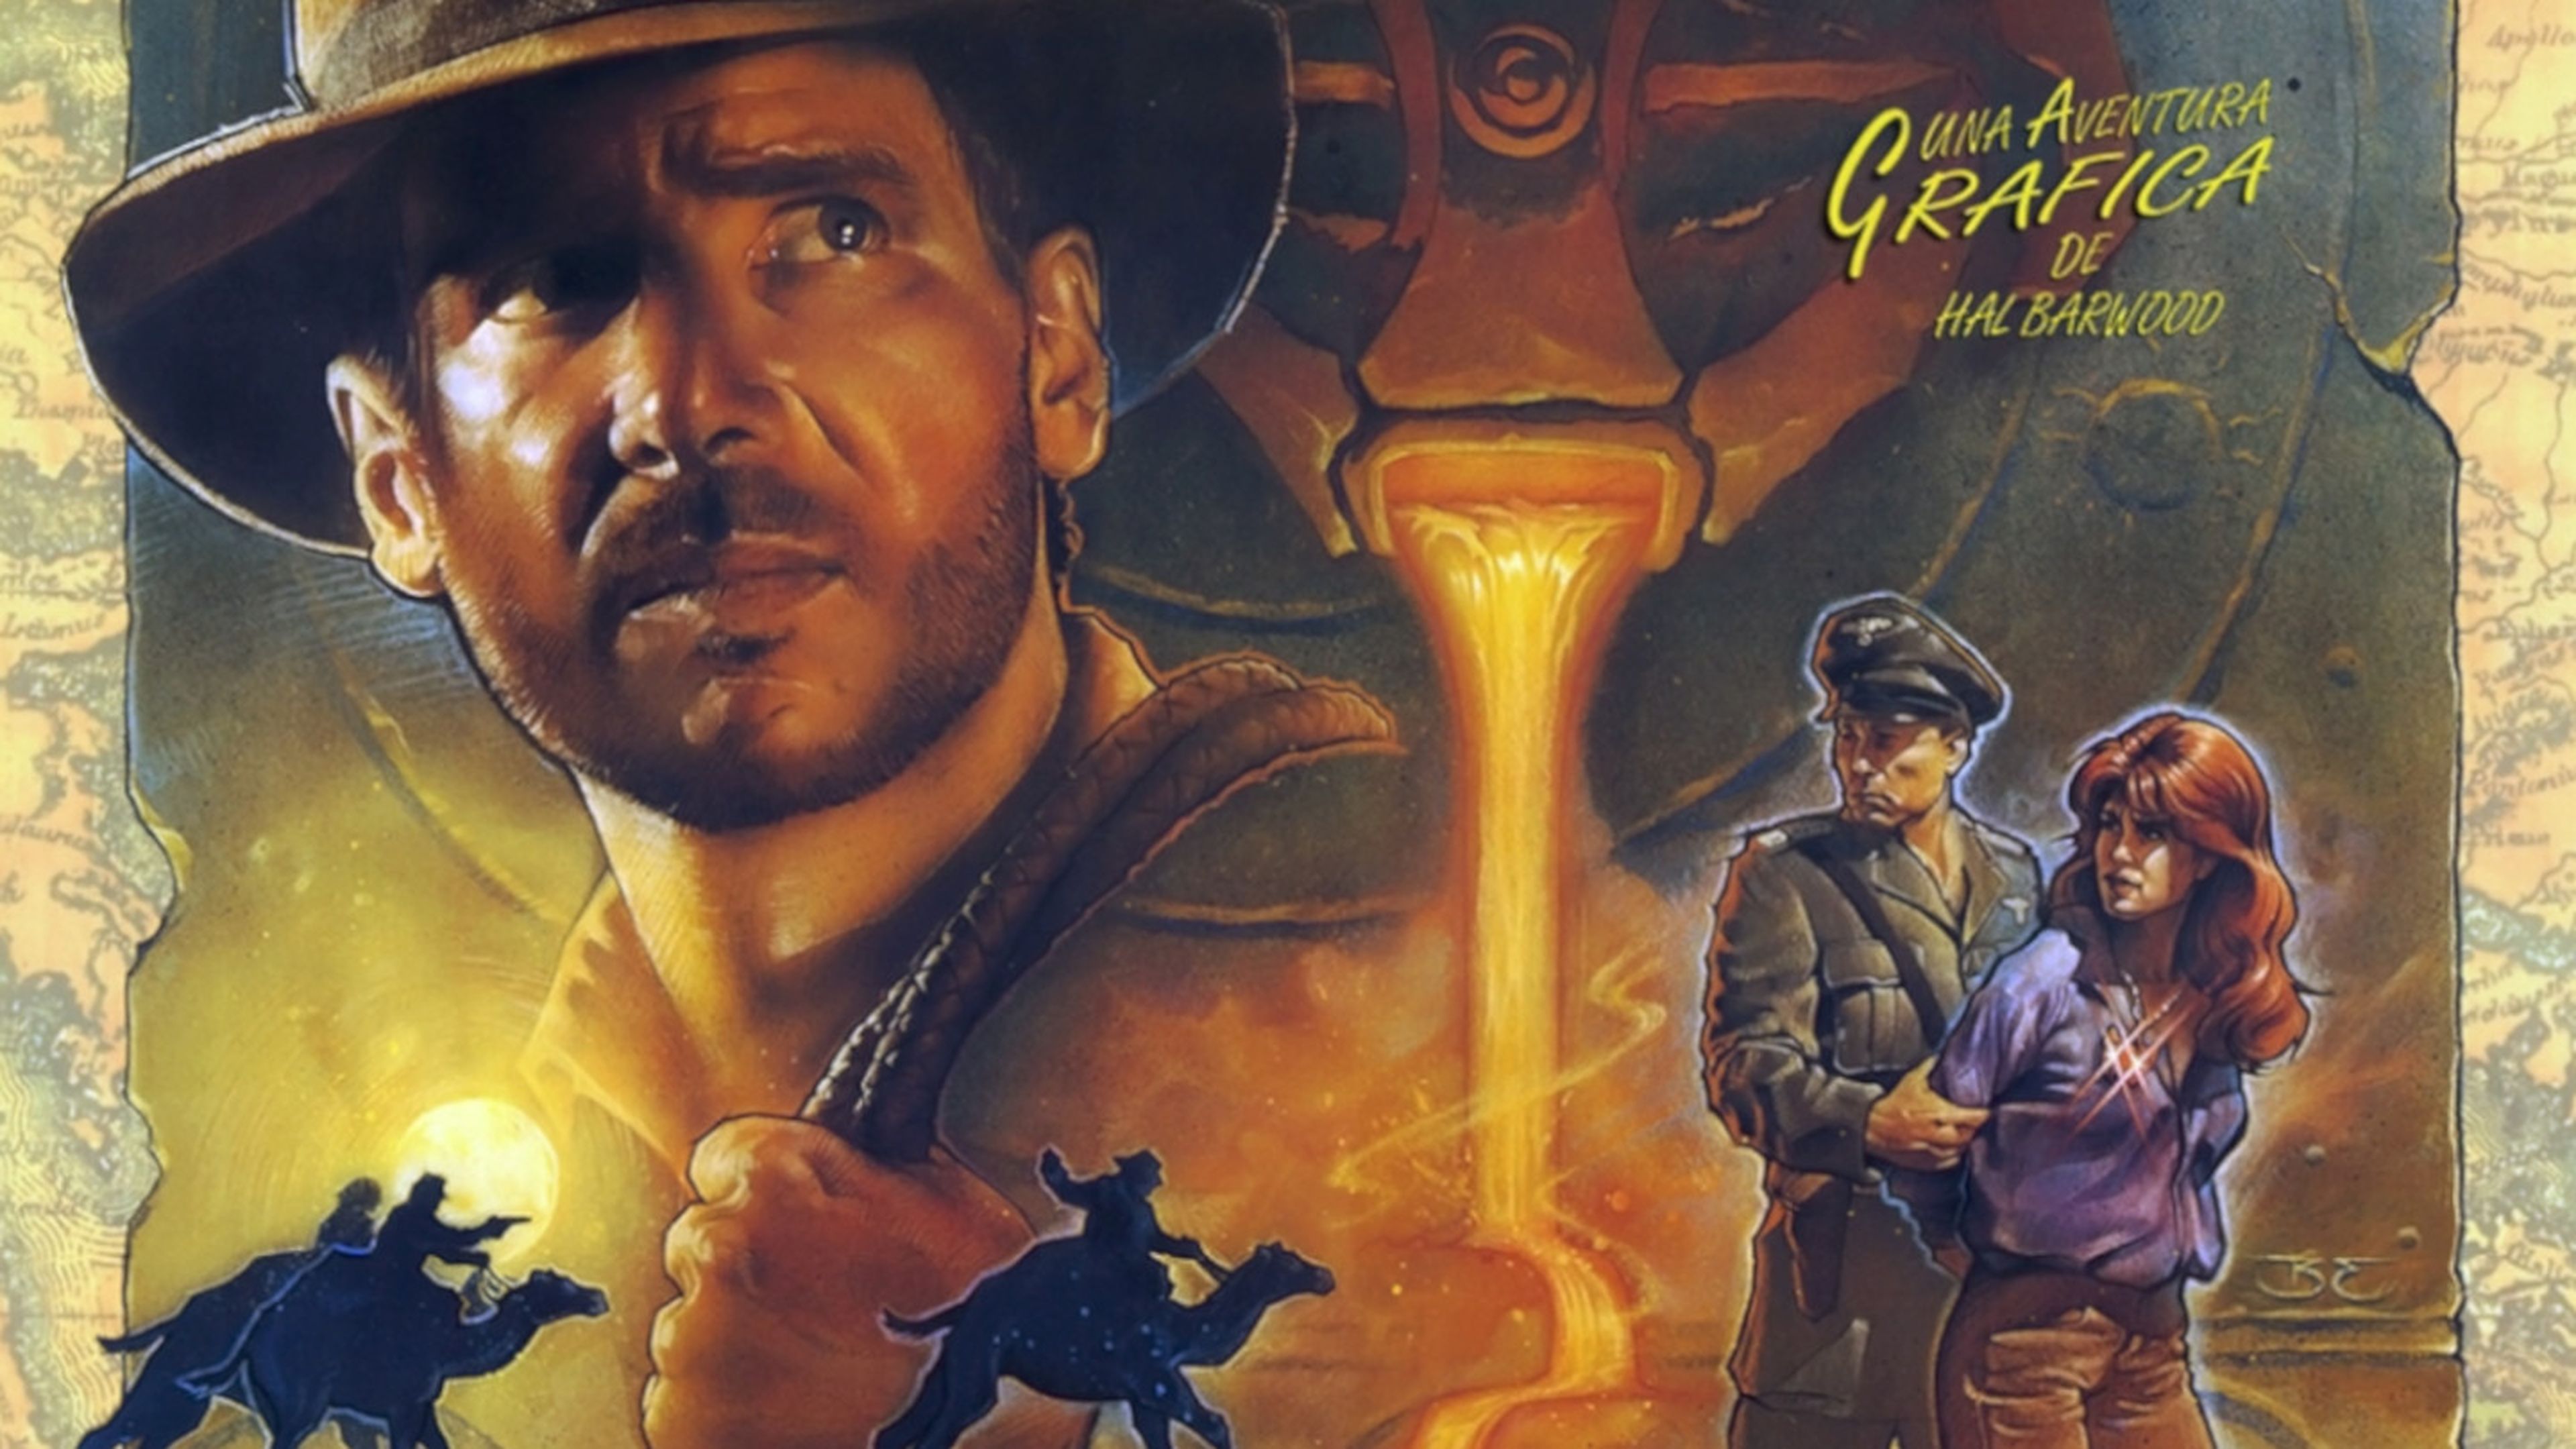 Indiana Jones and the Fate of the Atlantis